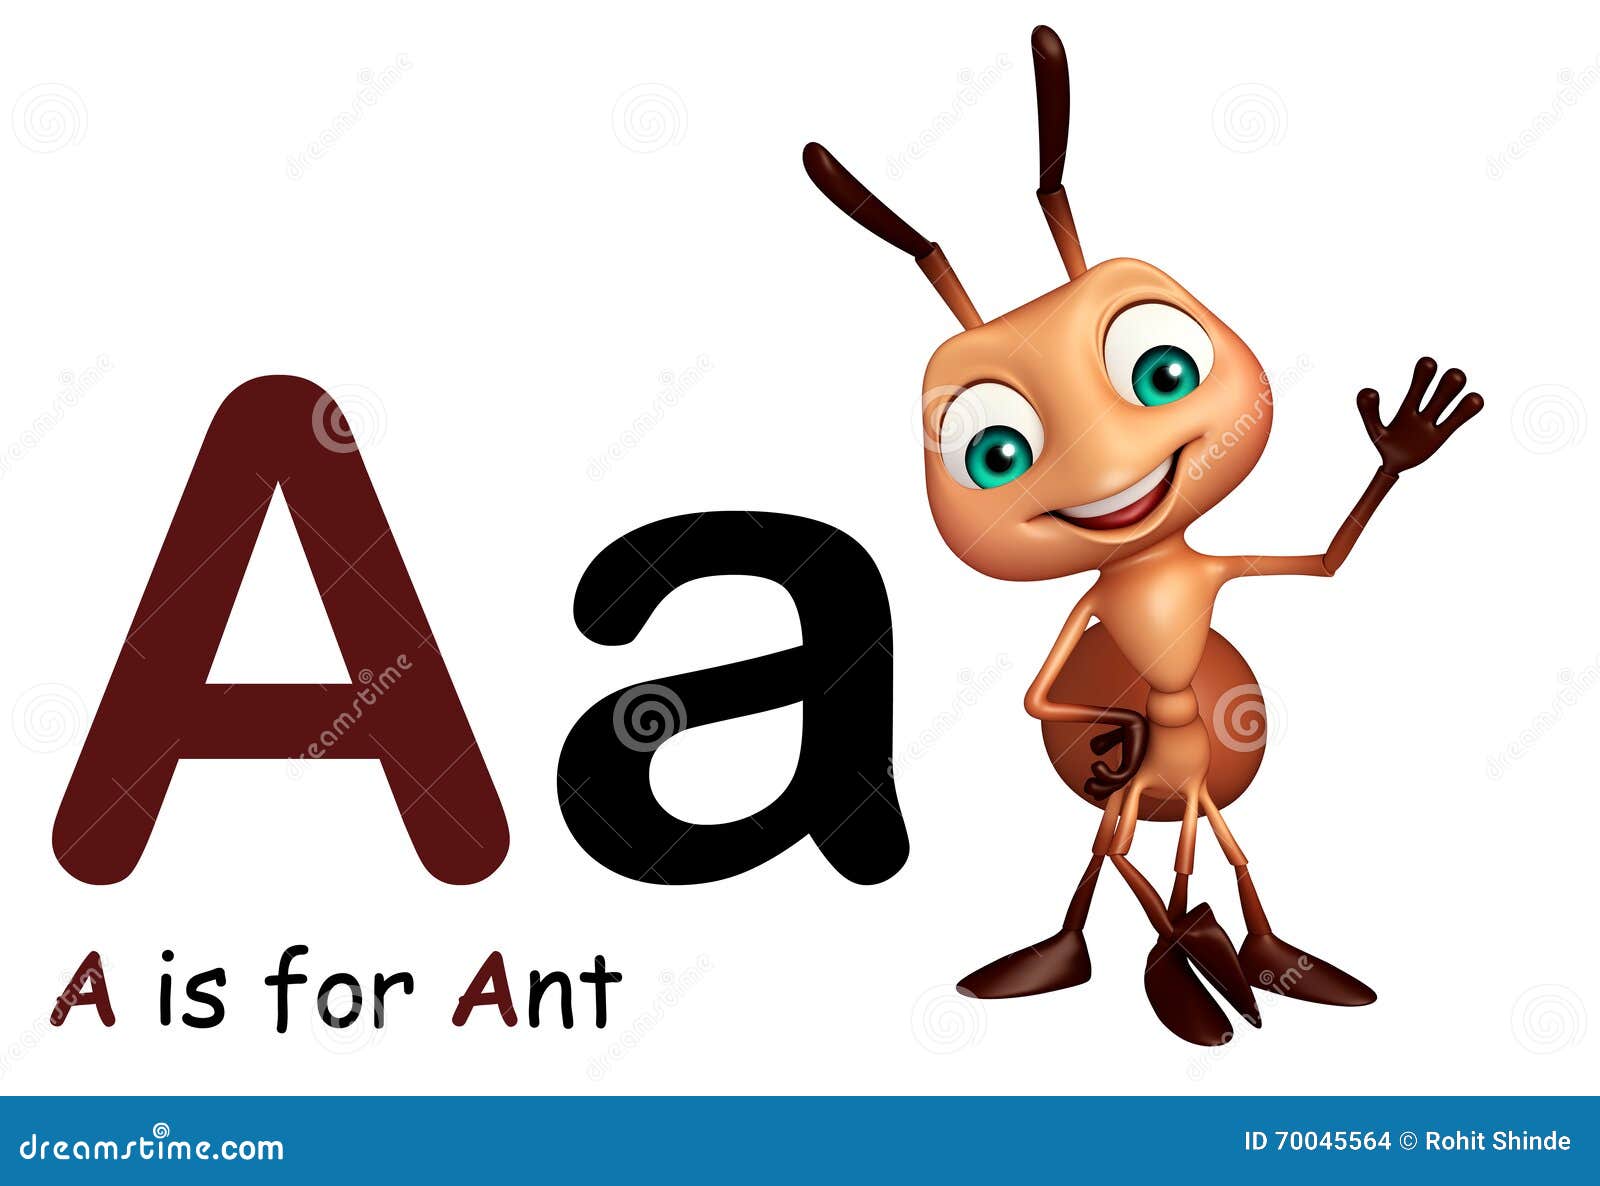 Ant with alphabate stock illustration. Illustration of education - 70045564